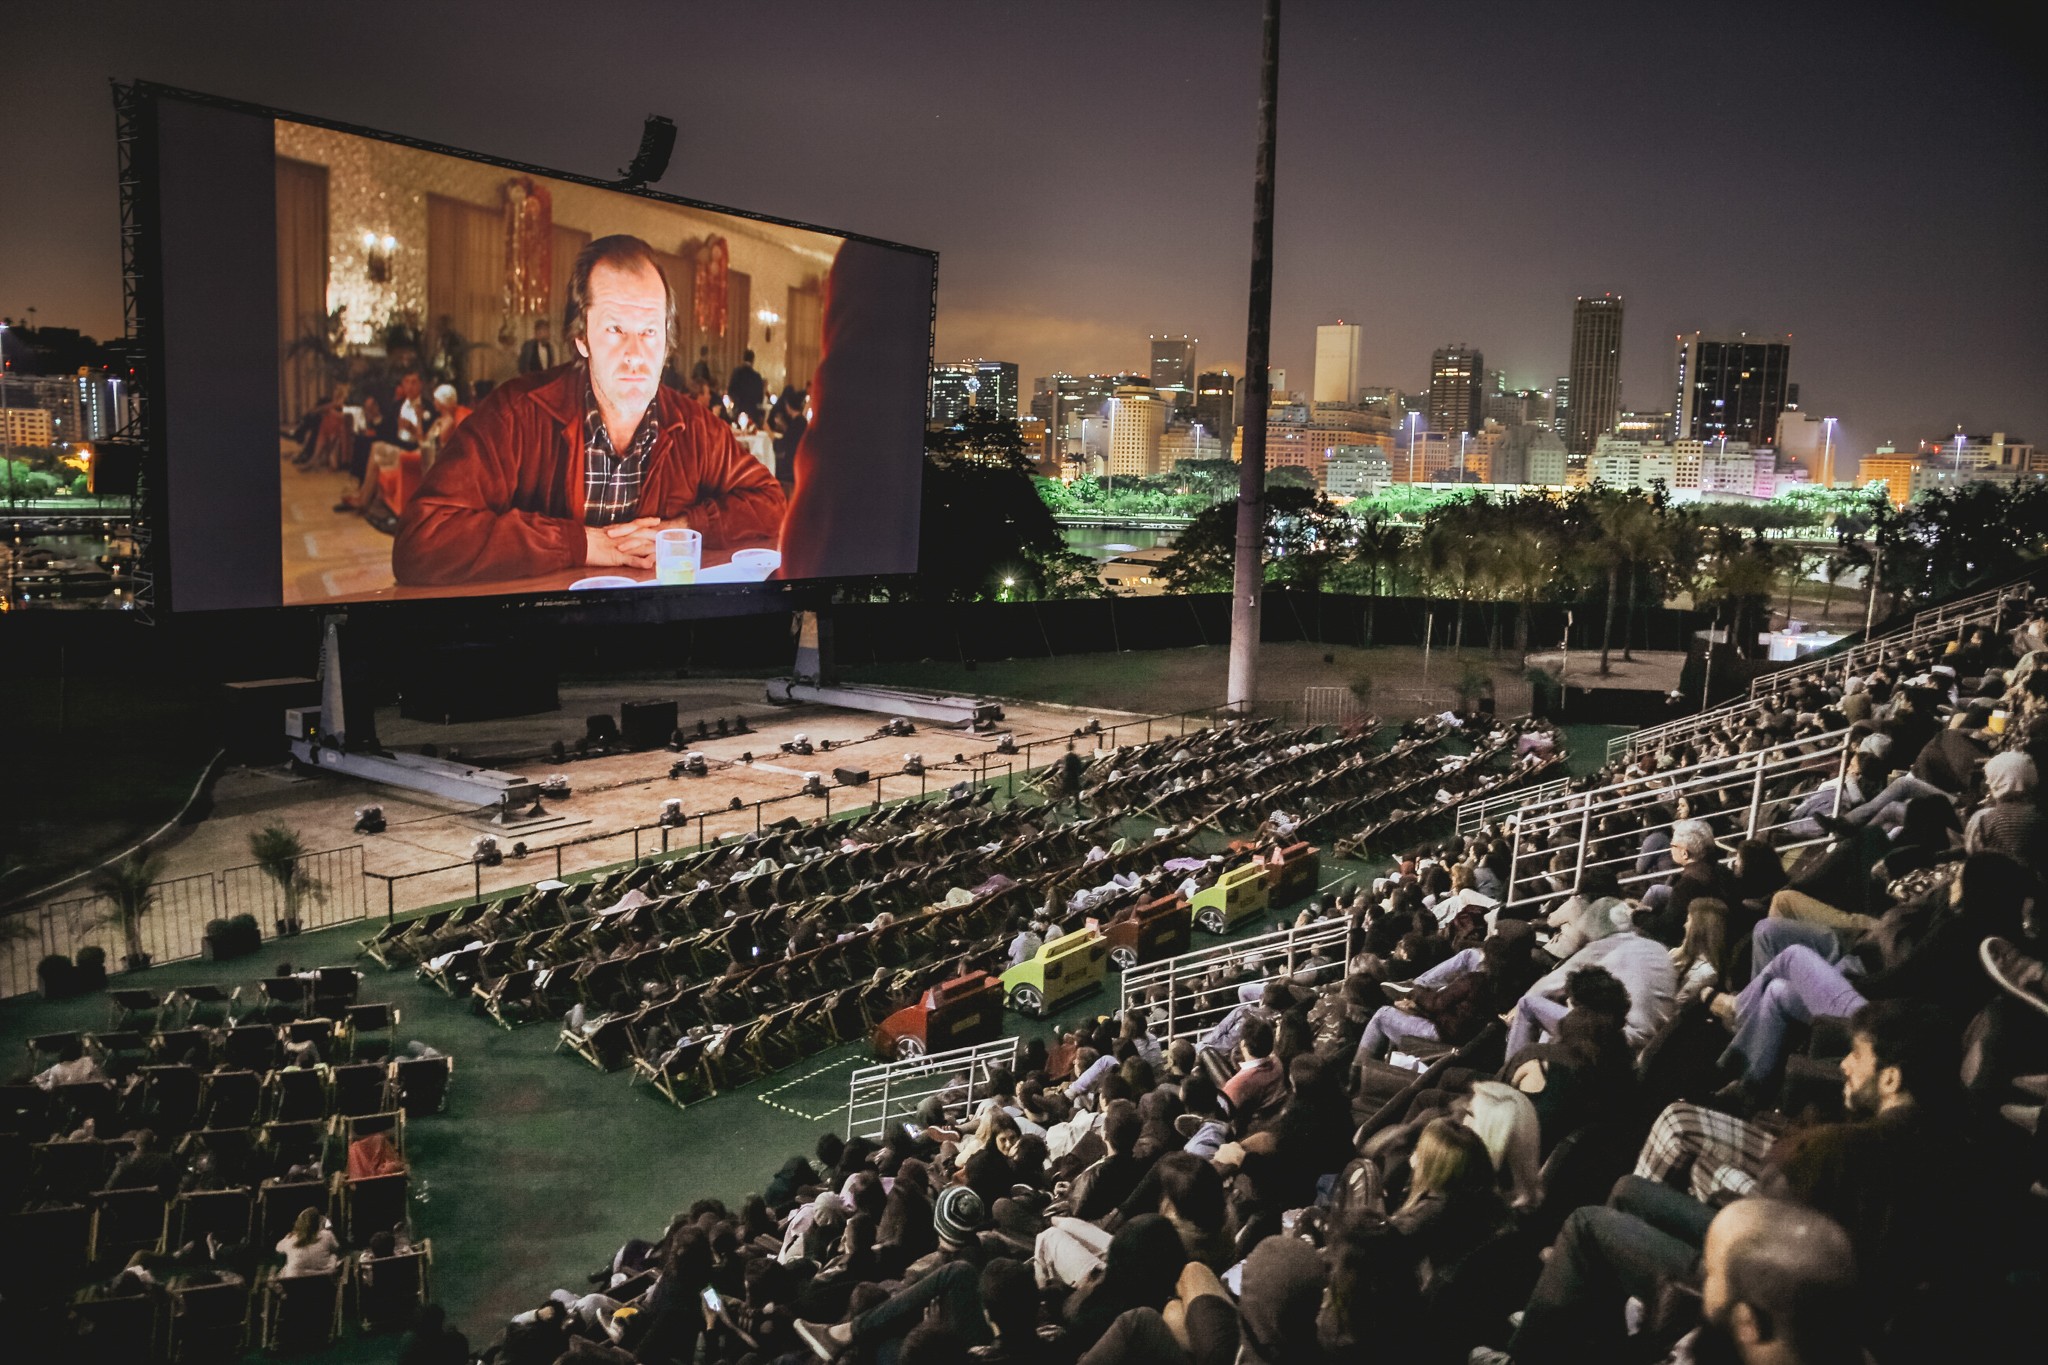 The open-air cinema will be screening several movies: classics, superheroes, and even horror.